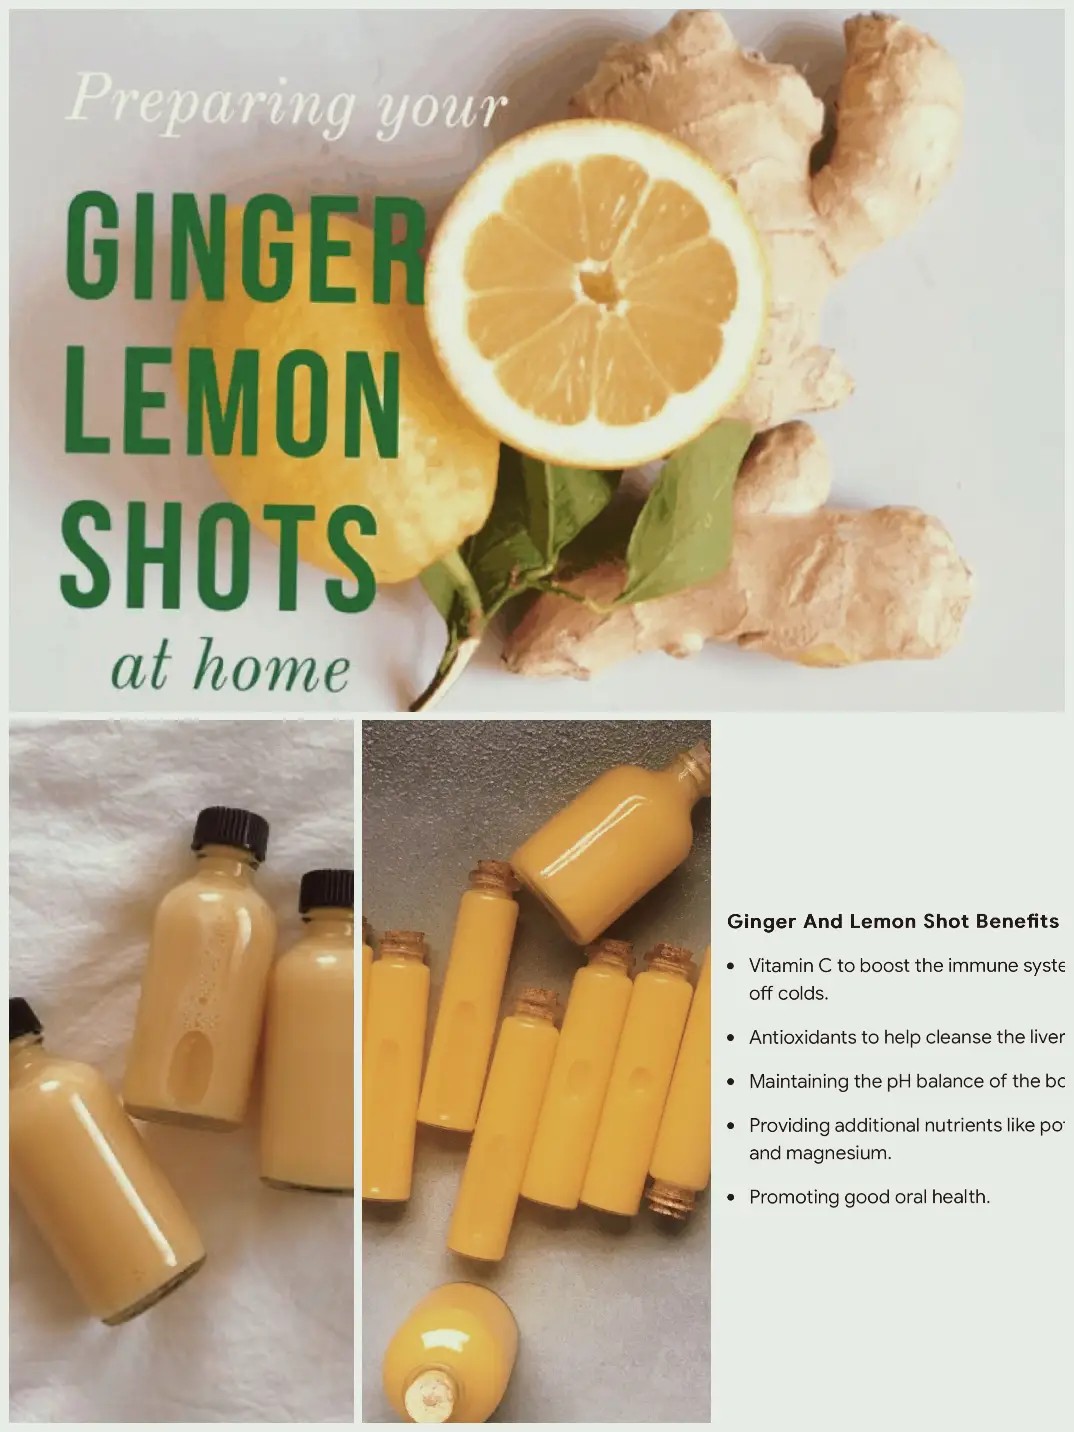 Ginger and turmeric shots - Marie Food Tips